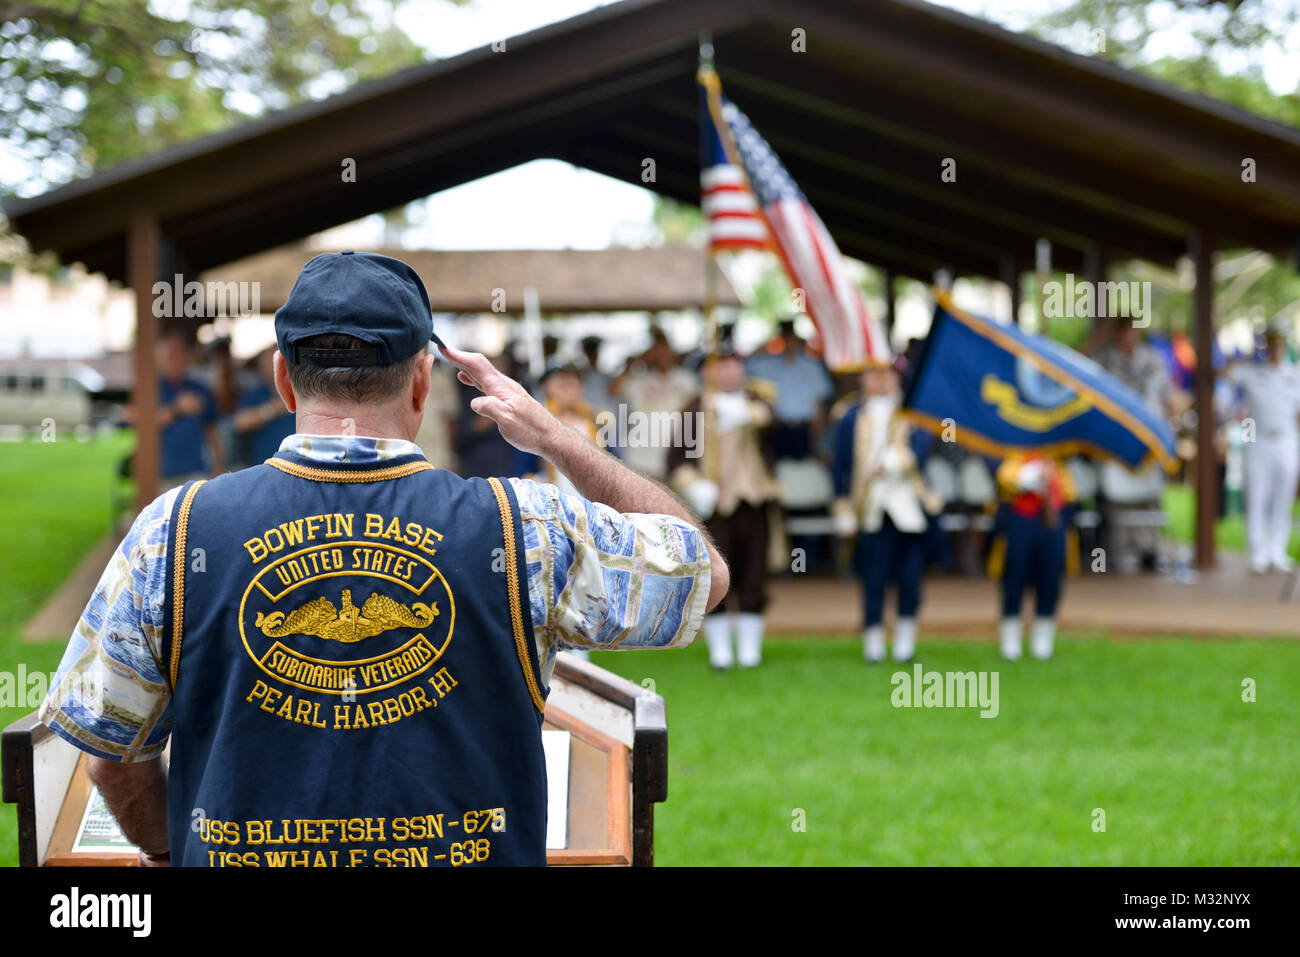 160530-N-LY160-735  JOINT BASE PEARL HARBOR-HICKAM, Hawaii (May 30, 2016) – Retired Lt. Cmdr. Paul T. Jurcsak, base commander of the U.S. Submarine Veterans Bowfin Base, salutes the national ensign during the Memorial Day ceremony at the USS Parche Submarine Park and Memorial at Joint Base Pearl Harbor-Hickam. The service honored past submariners and paid tribute to the 65 U.S. submarines lost since 1915, with 52 lost during World War II alone.  (U.S. Navy photo by Mass Communication Specialist 2nd Class Michael H. Lee) 160530-N-LY160-735 1 27329301432 o Stock Photo